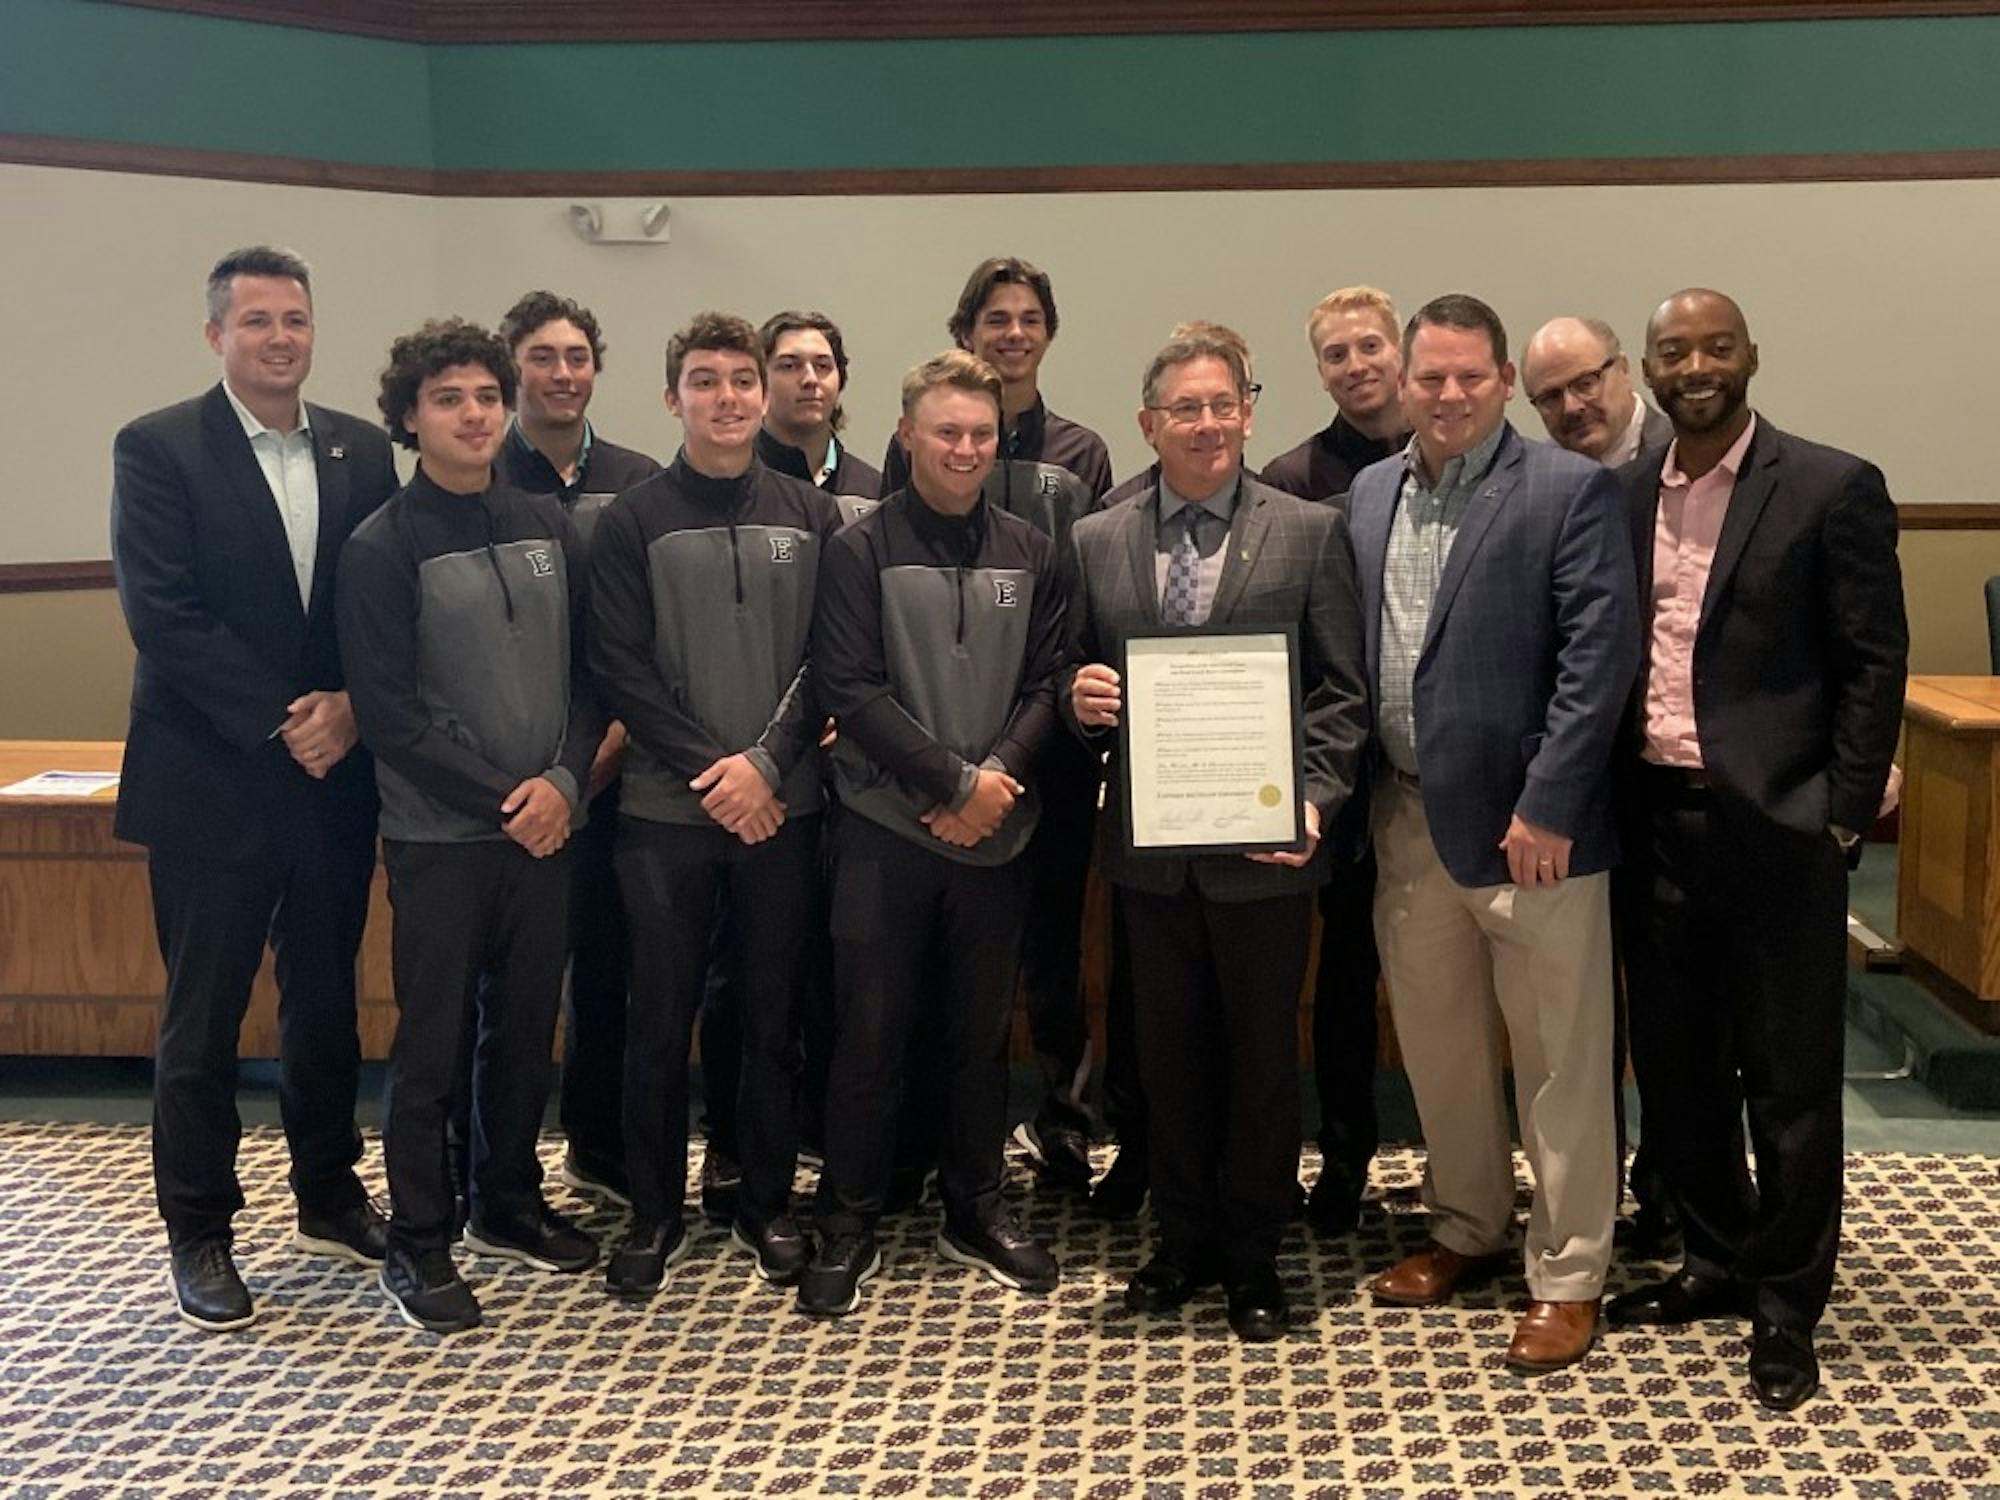 EMU men's golf presented with recognition